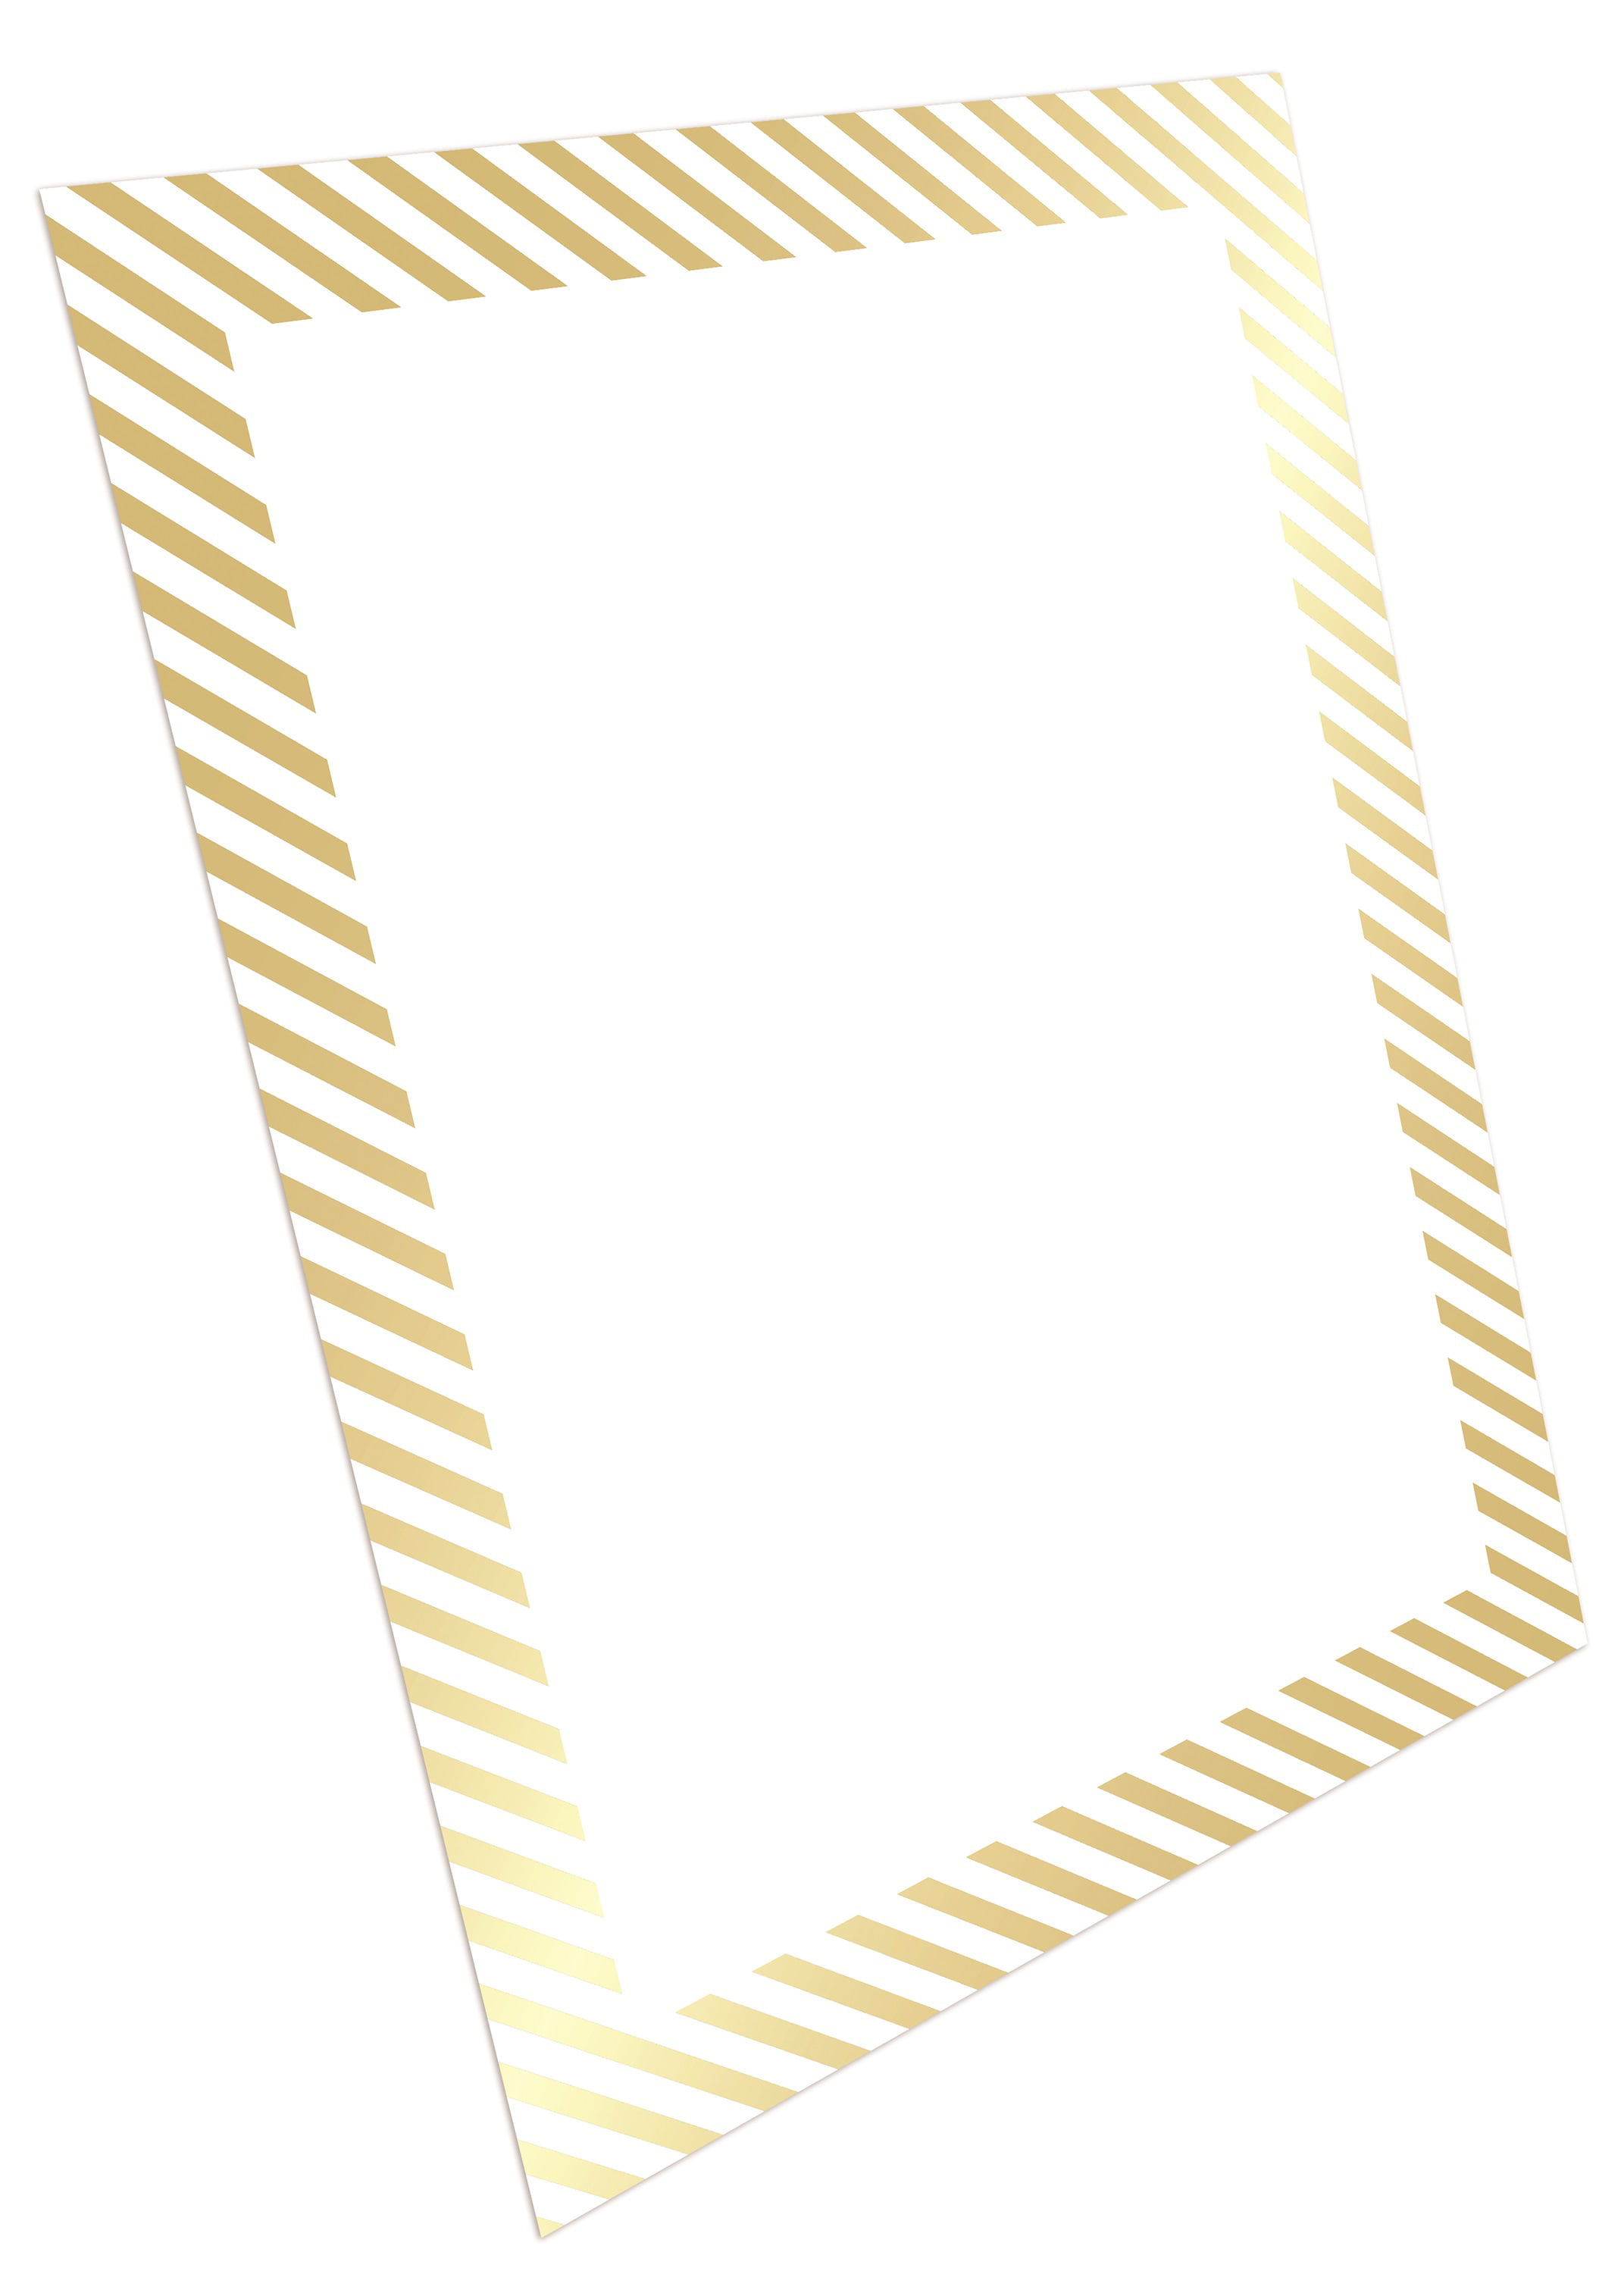 UCreate 22x28 Foil White with Gold Striped Border Poster Board